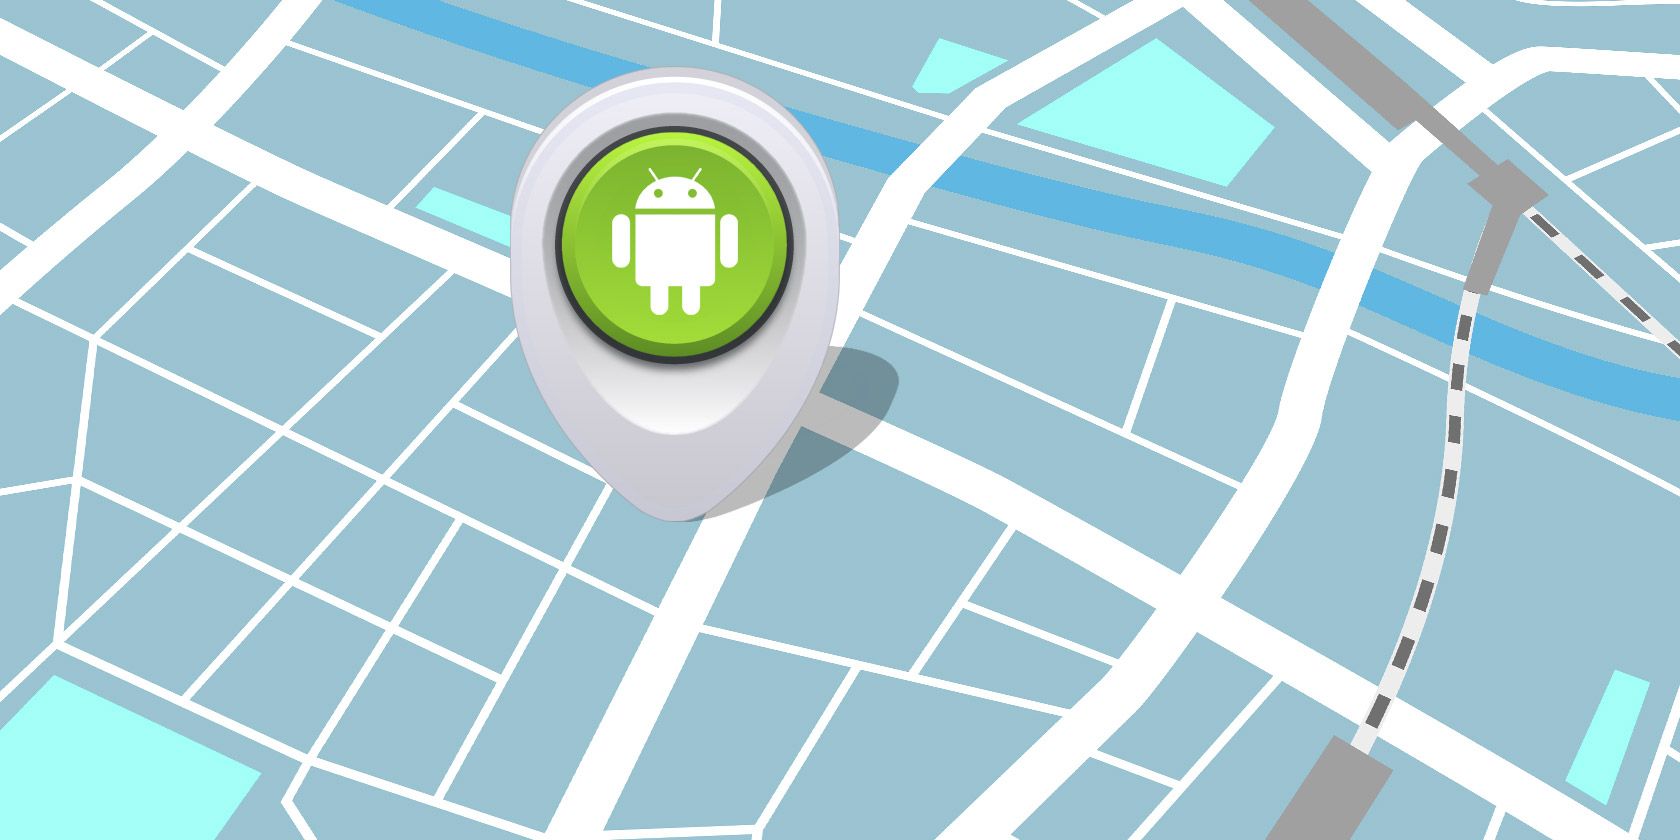 How to Track and Find the Location of Your Phone